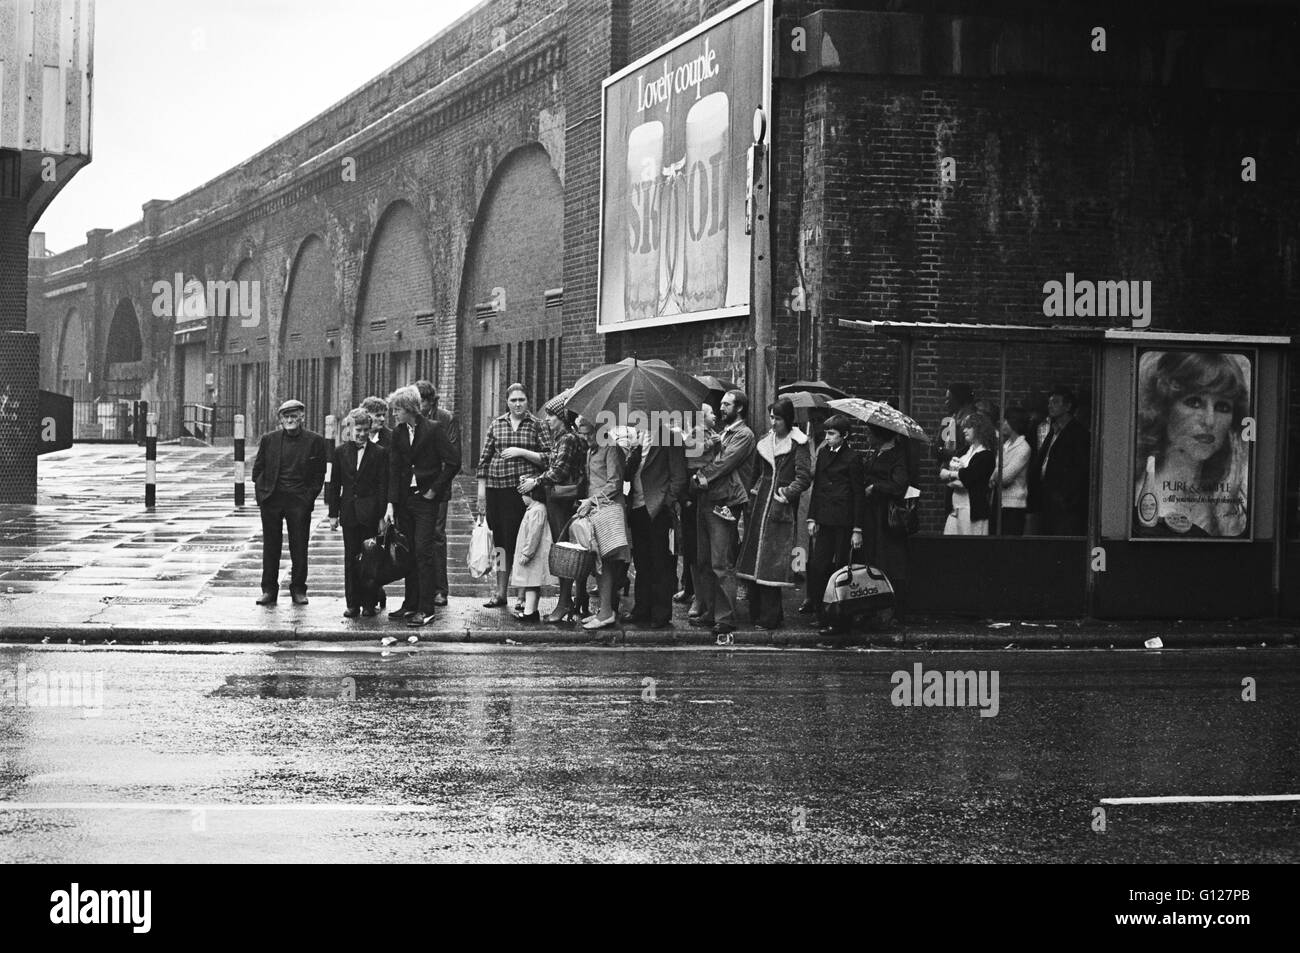 Archive image of a bus queue in Lambeth, London, England 1979, under a Skol lager billboard Stock Photo